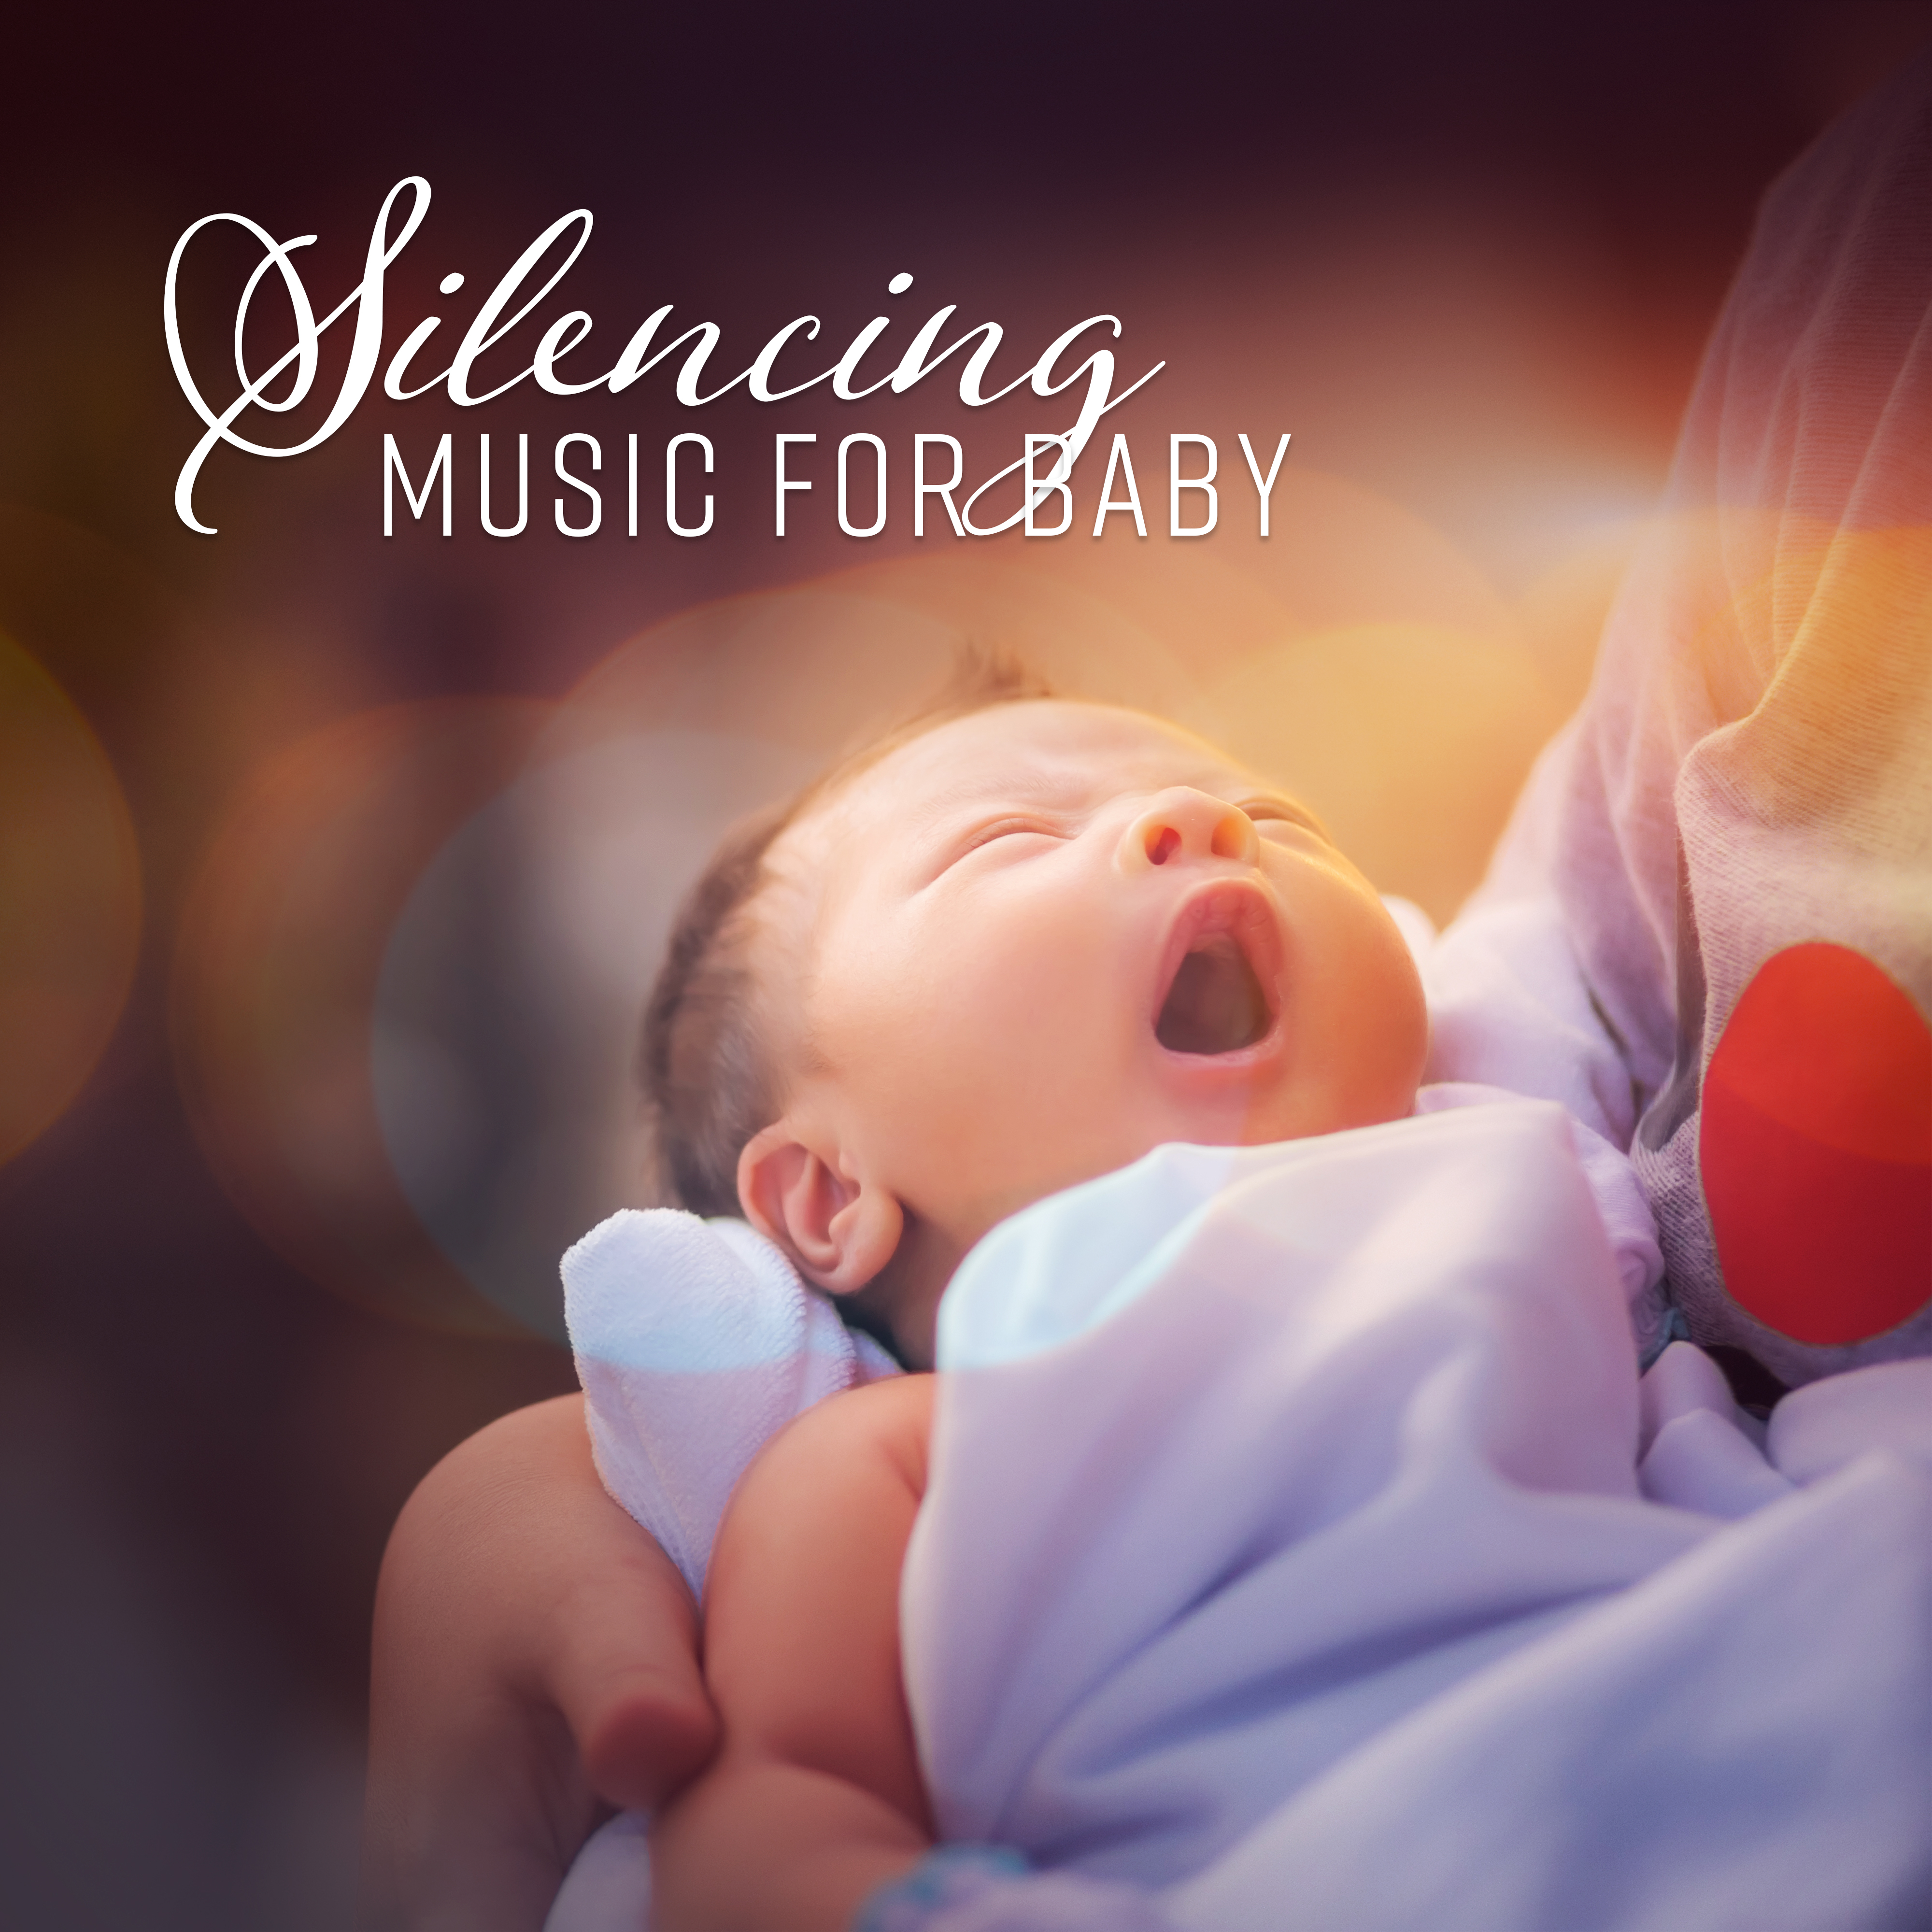 Silencing Music for Baby